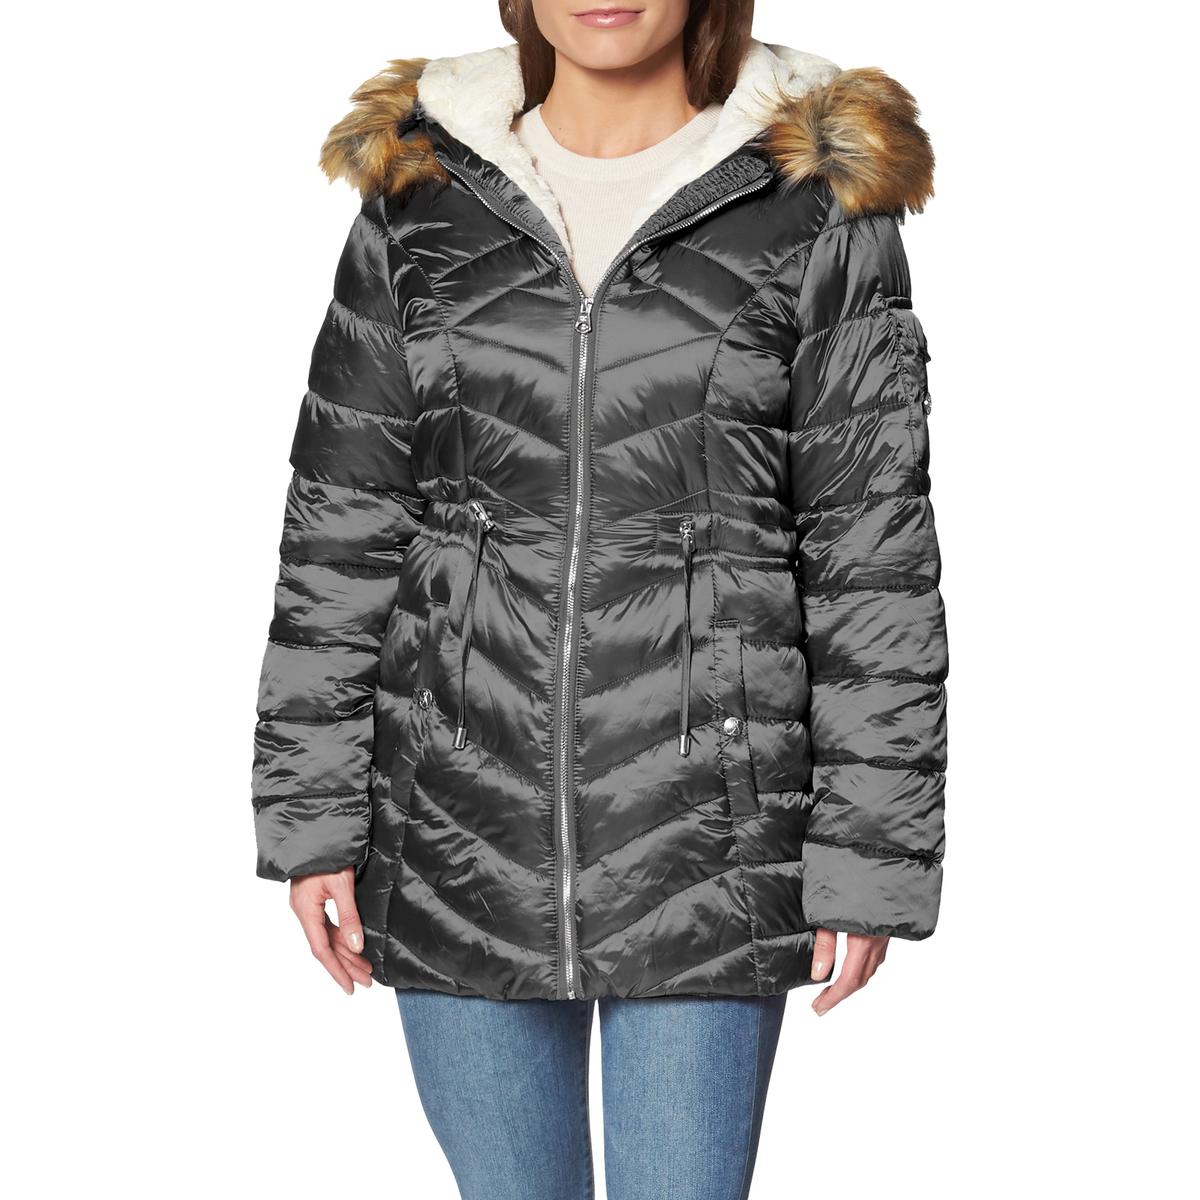 Jessica Simpson Puffer Coat for Women-Faux Fur Cozy Lined Quilted